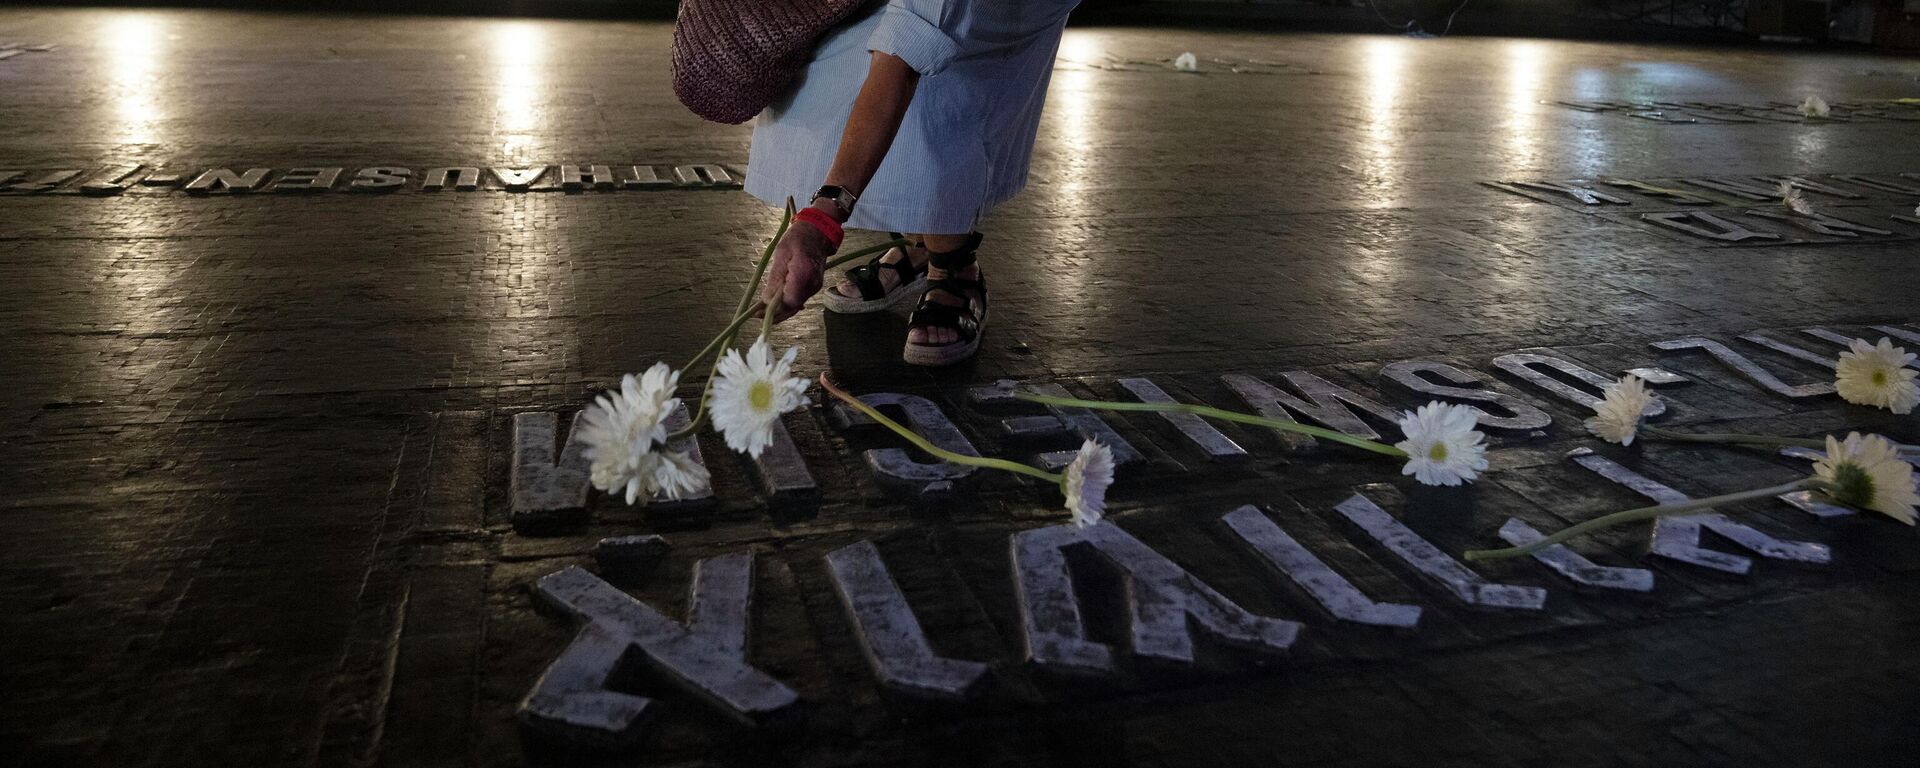 A woman places a flower on a marker for the Auschwitz concentration camp in the Hall of Remembrance during the Holocaust Martyrs and Heroes Remembrance Day at the Yad Vashem Holocaust Museum in Jerusalem, Thursday, April 28, 2022. (AP Photo/Maya Alleruzzo) - Sputnik International, 1920, 08.06.2022